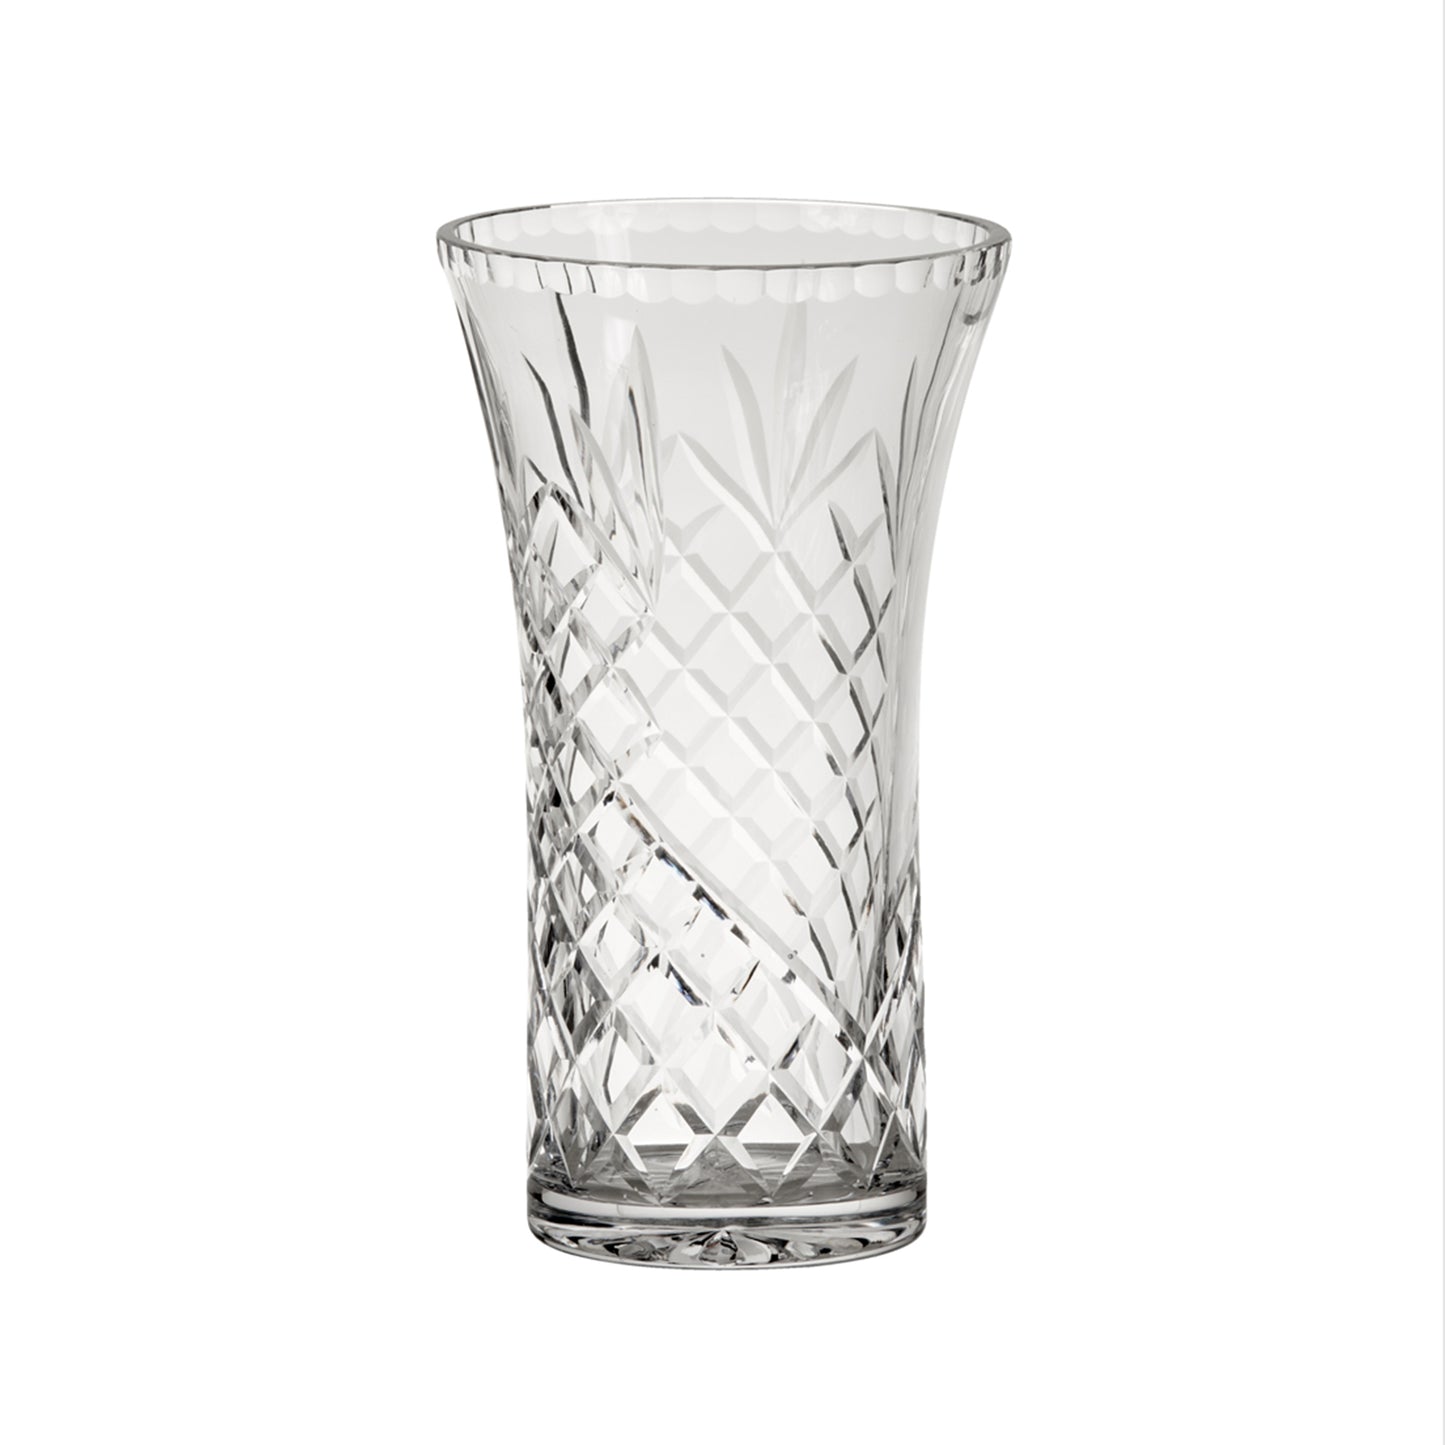 Crystal Flared Vase With Medallion Ii Pattern, 8.25" X 4.75"